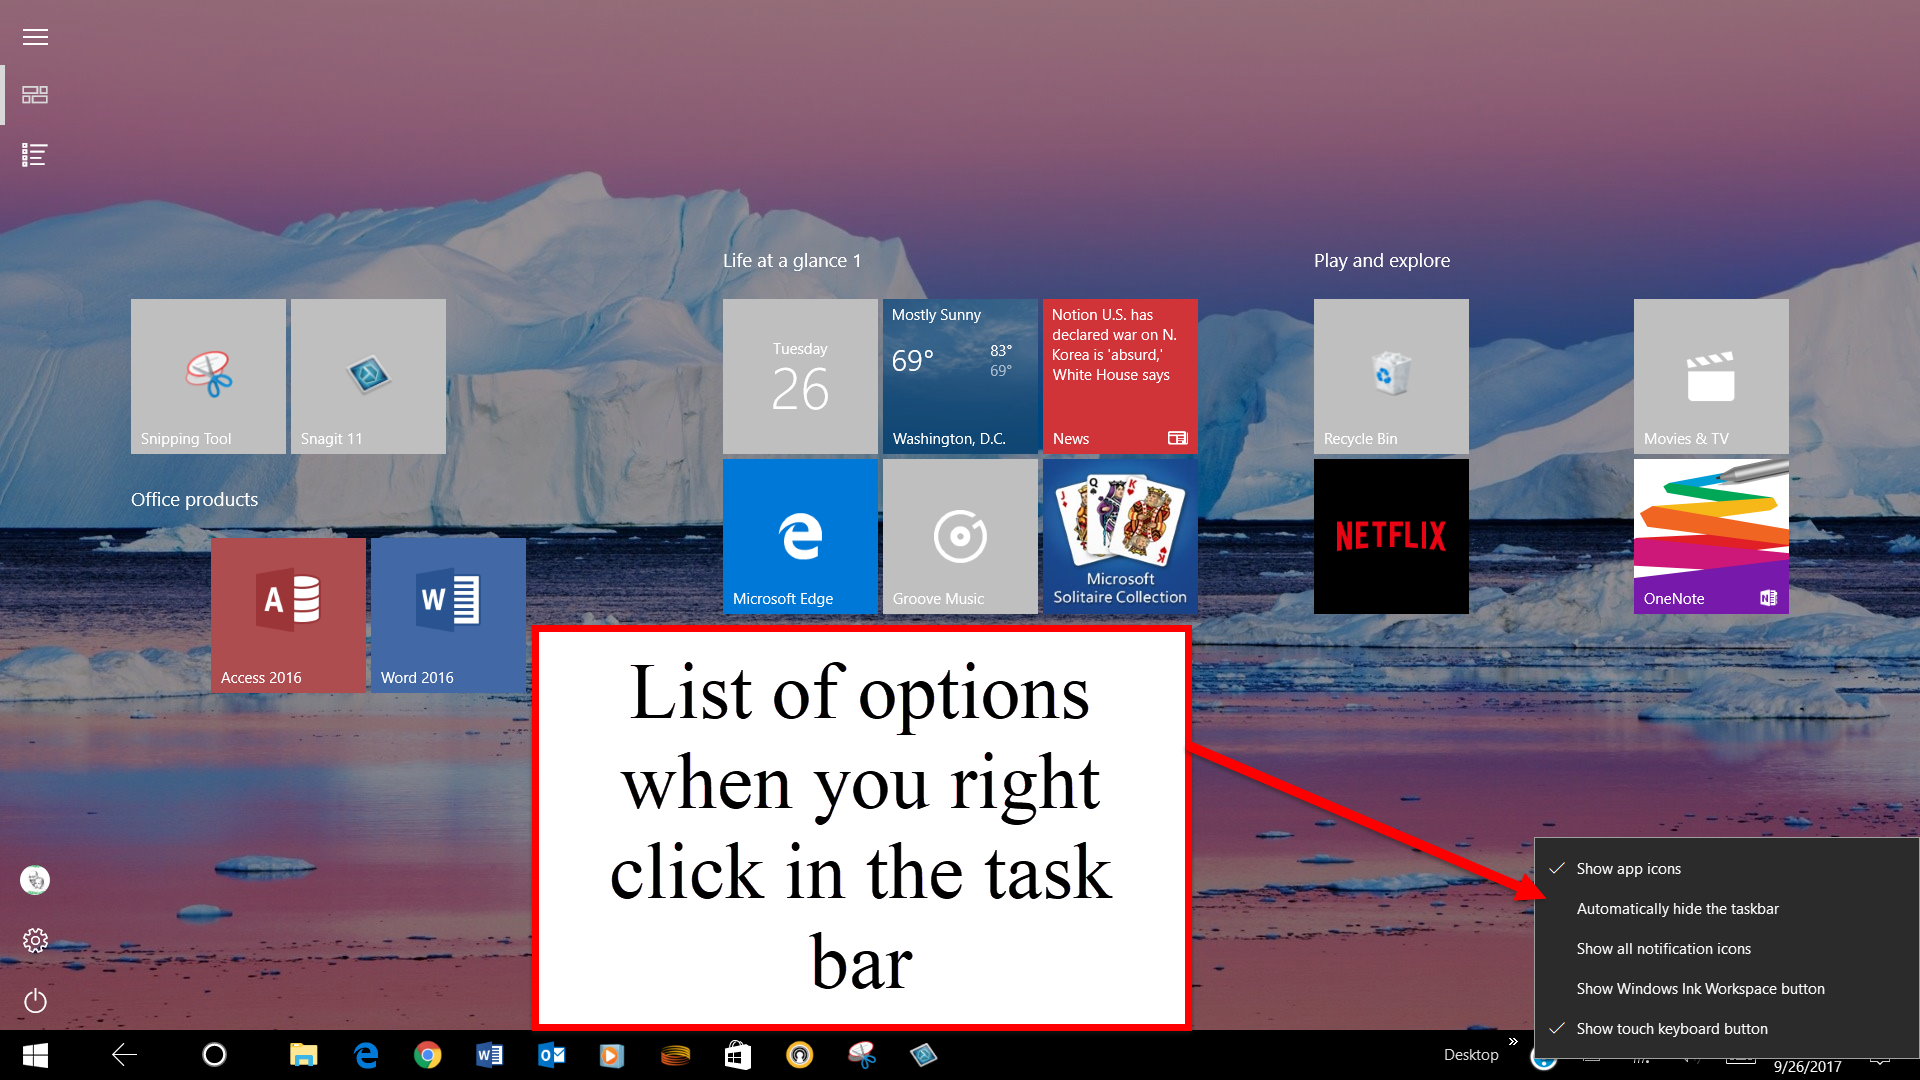 List of Options by right clicking on the Taskbar